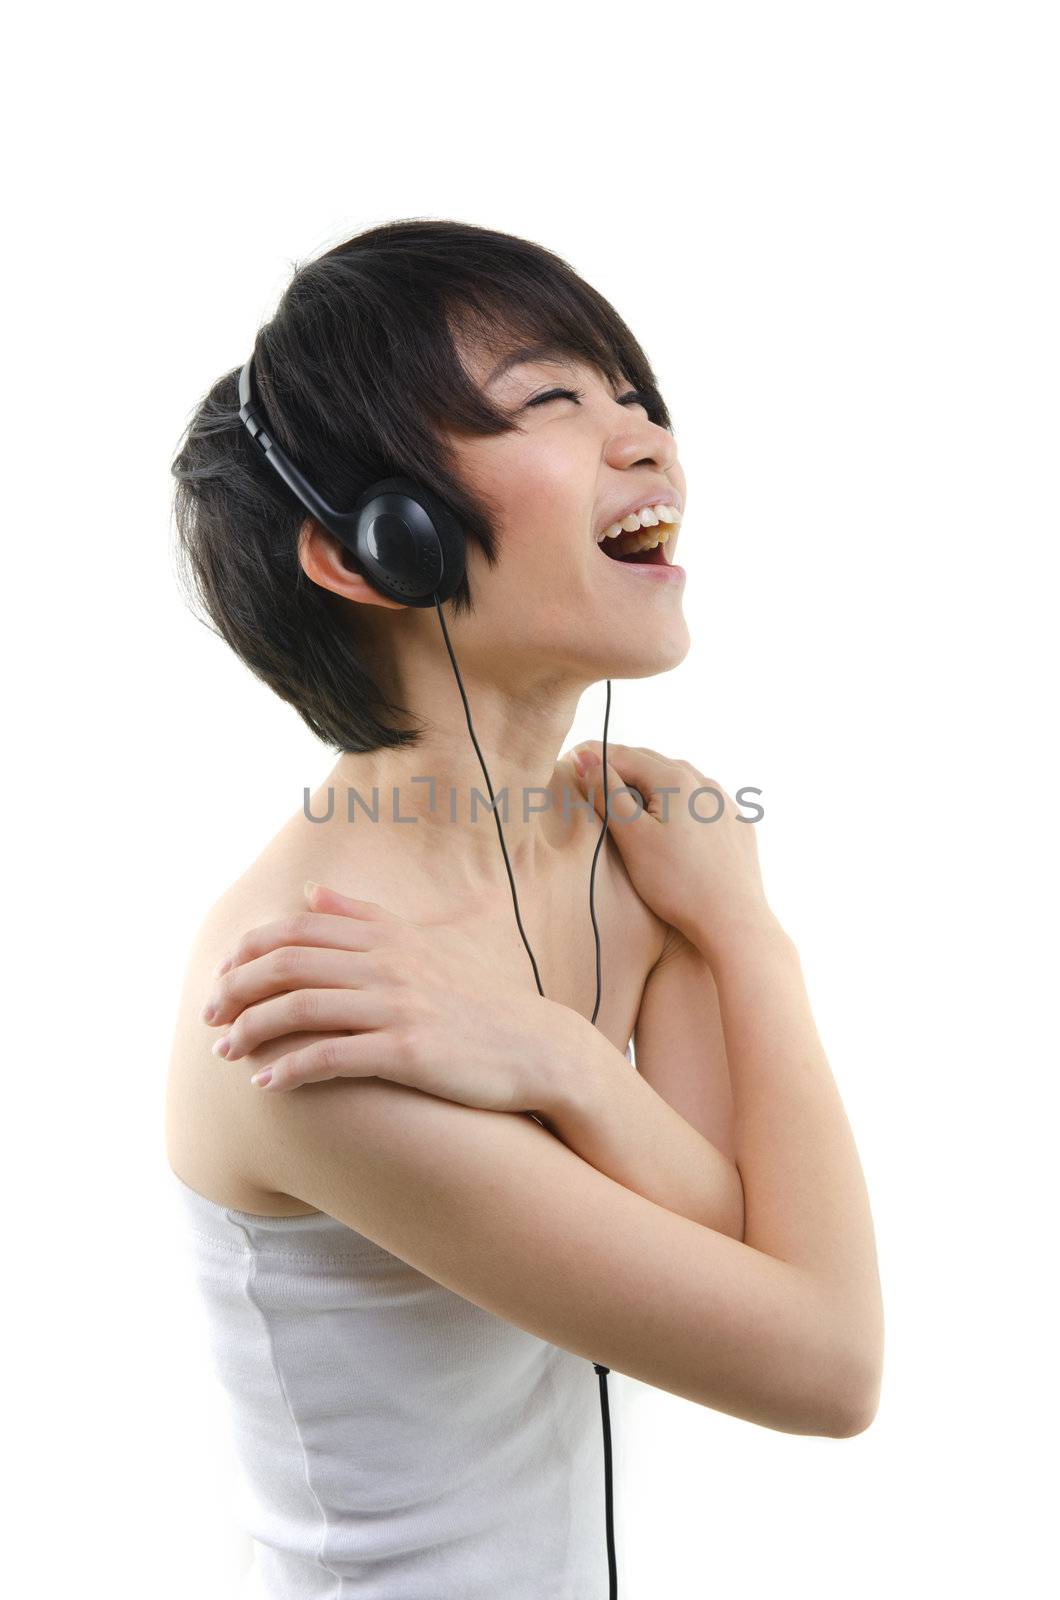 Music. Woman dancing with earbuds / headphones listening to music on mp3 player